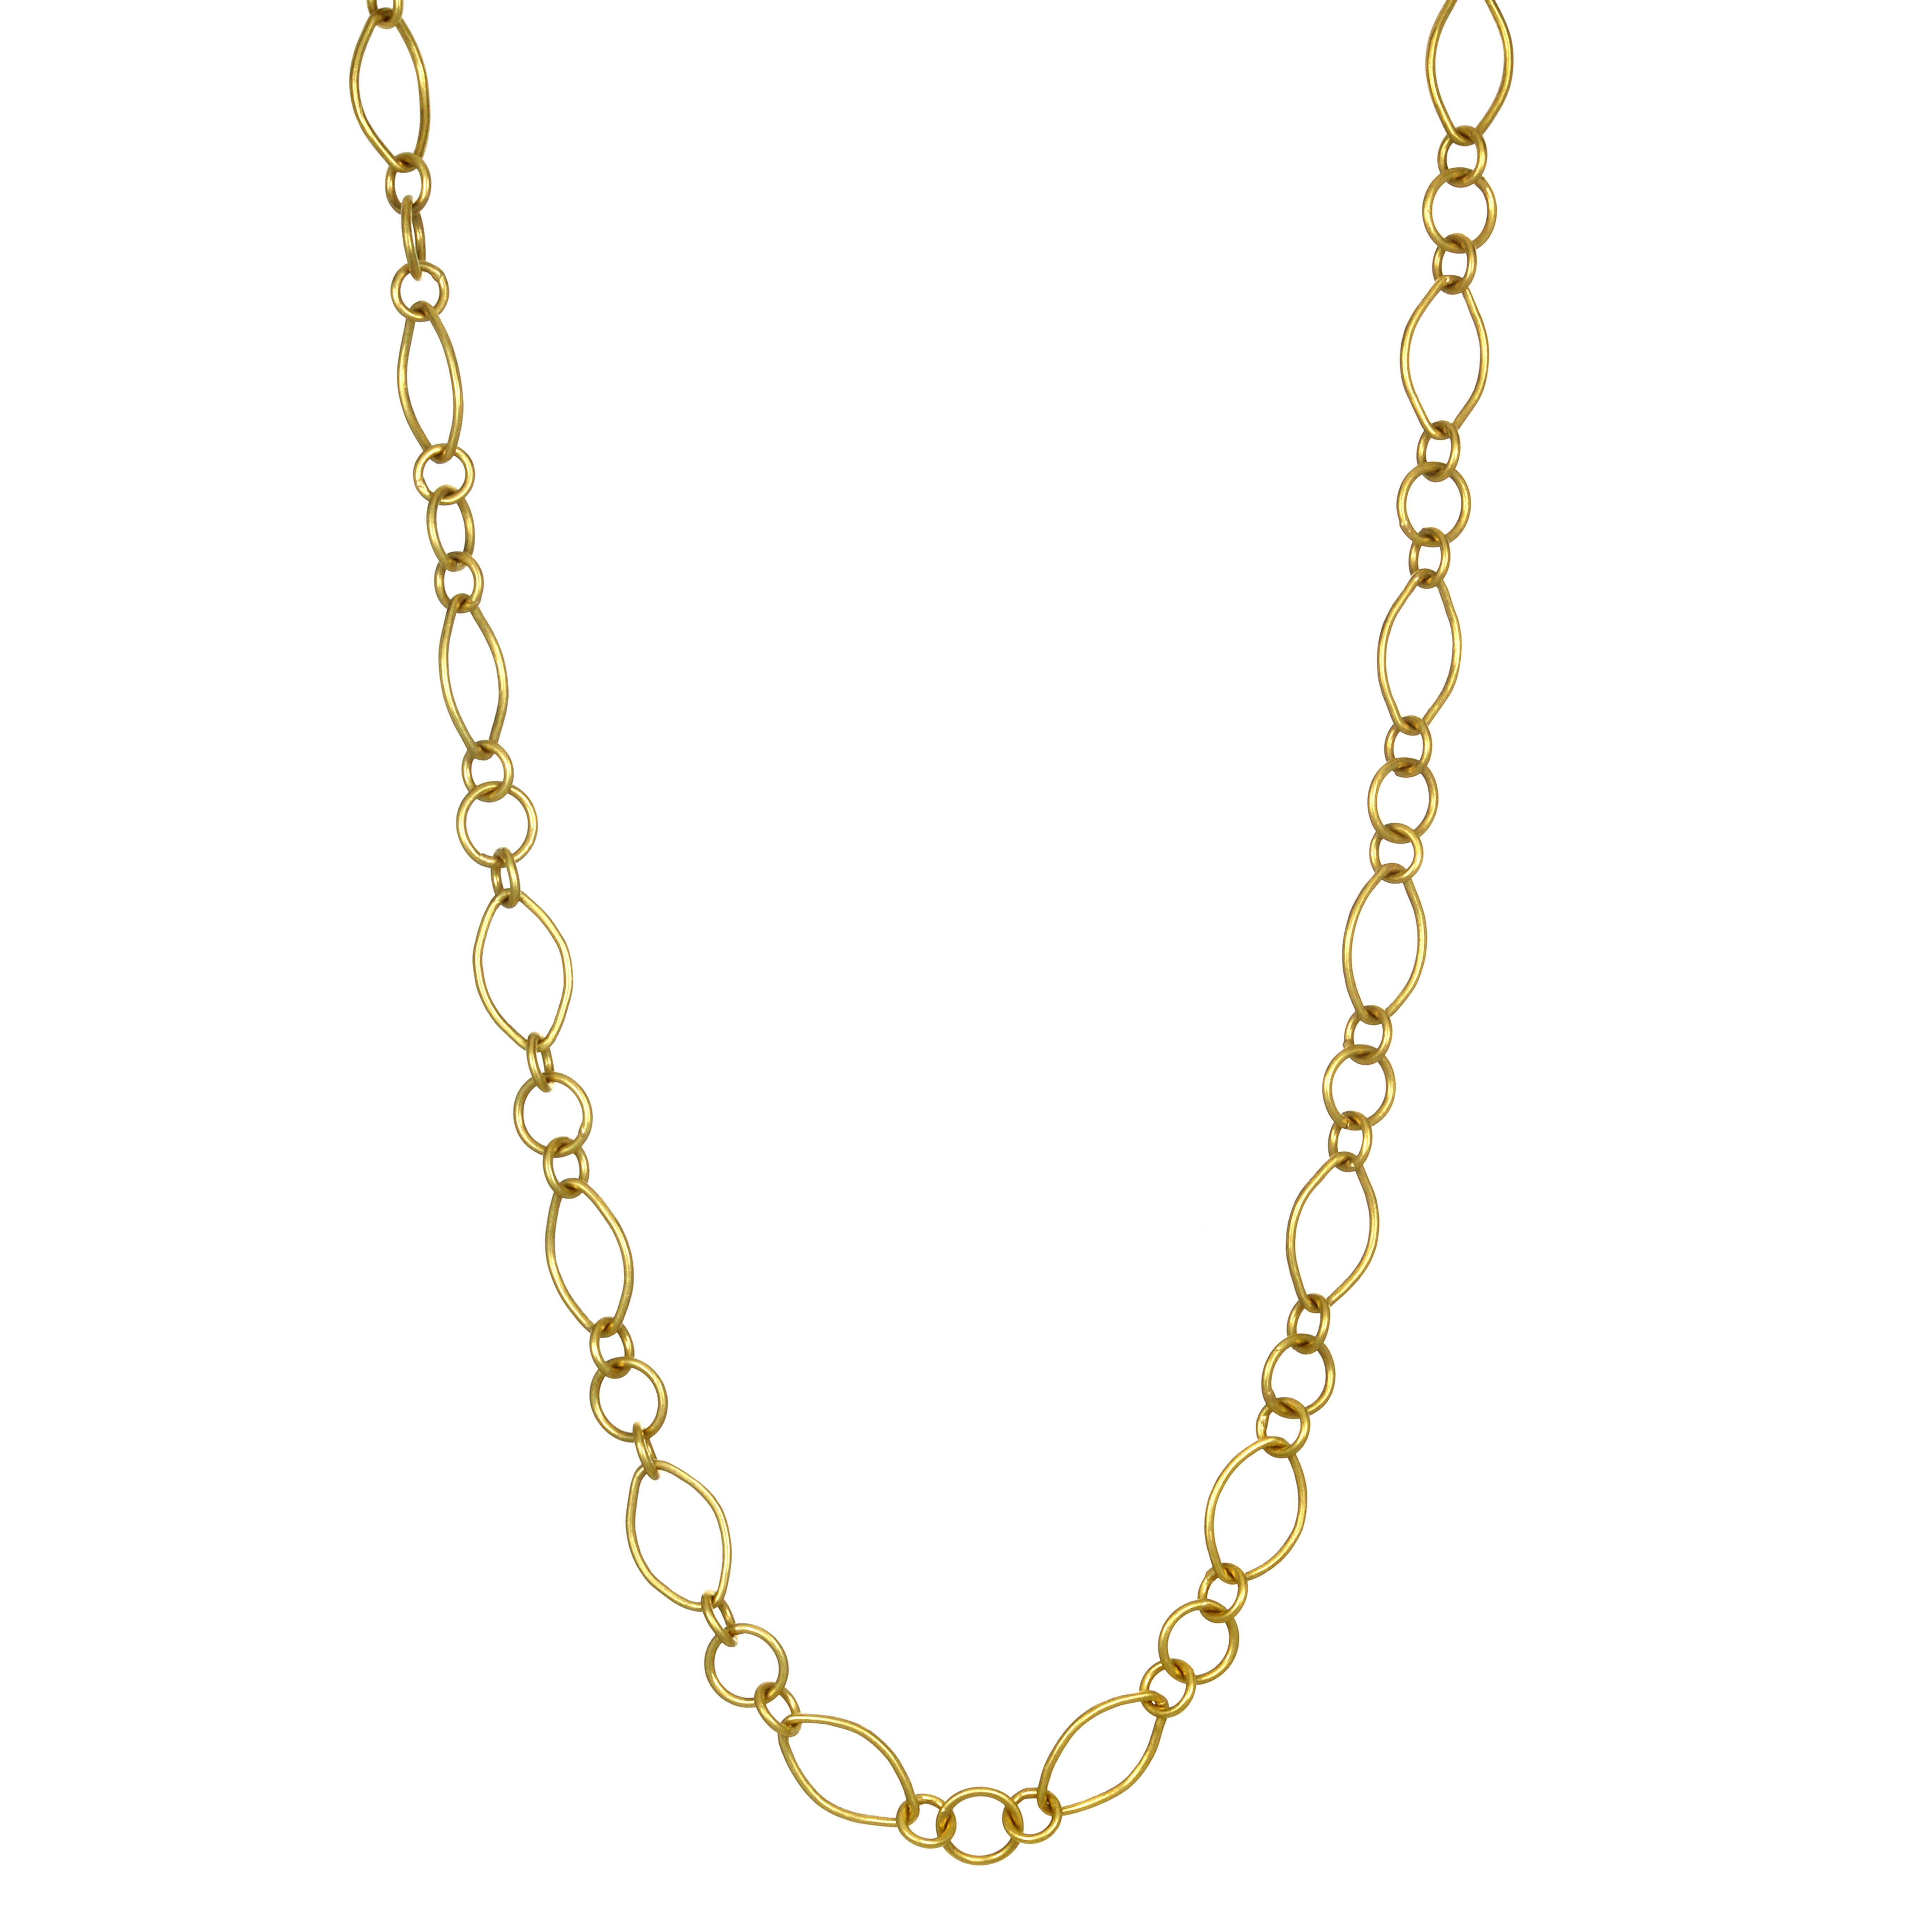 Faye Kim 18 Karat Handmade Mini Marquise Link Chain. Classic and versatile, this 18 karat gold handmade marquise link chain is a must have in every jewelry wardrobe. Alternating mixed shaped links give texture and uniqueness to this chain, bringing